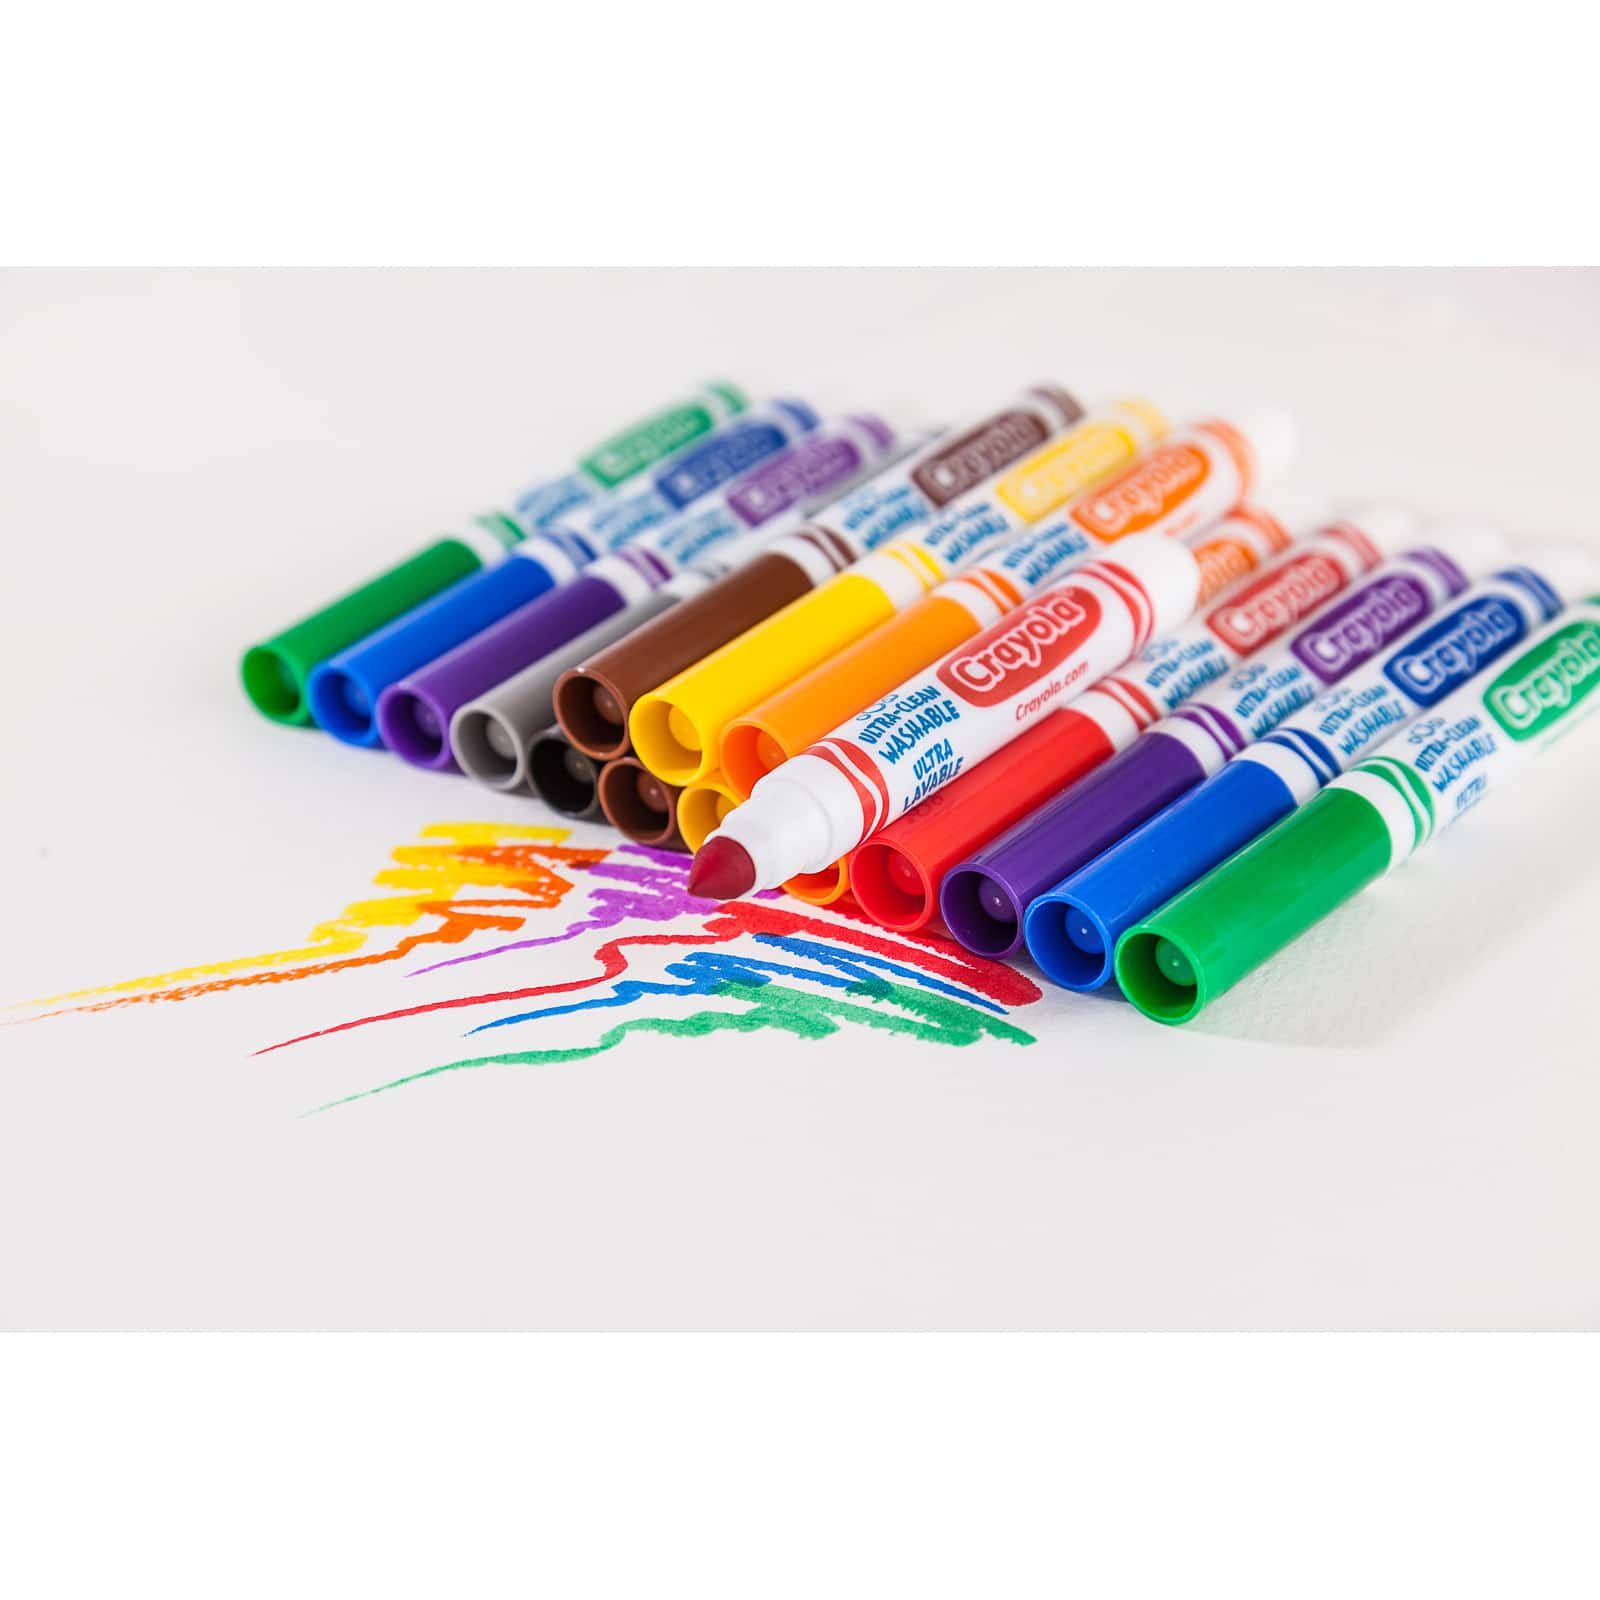 12 Packs: 10 ct. (120 total) Crayola® Ultra-Clean Fine Line Classic Color  Markers